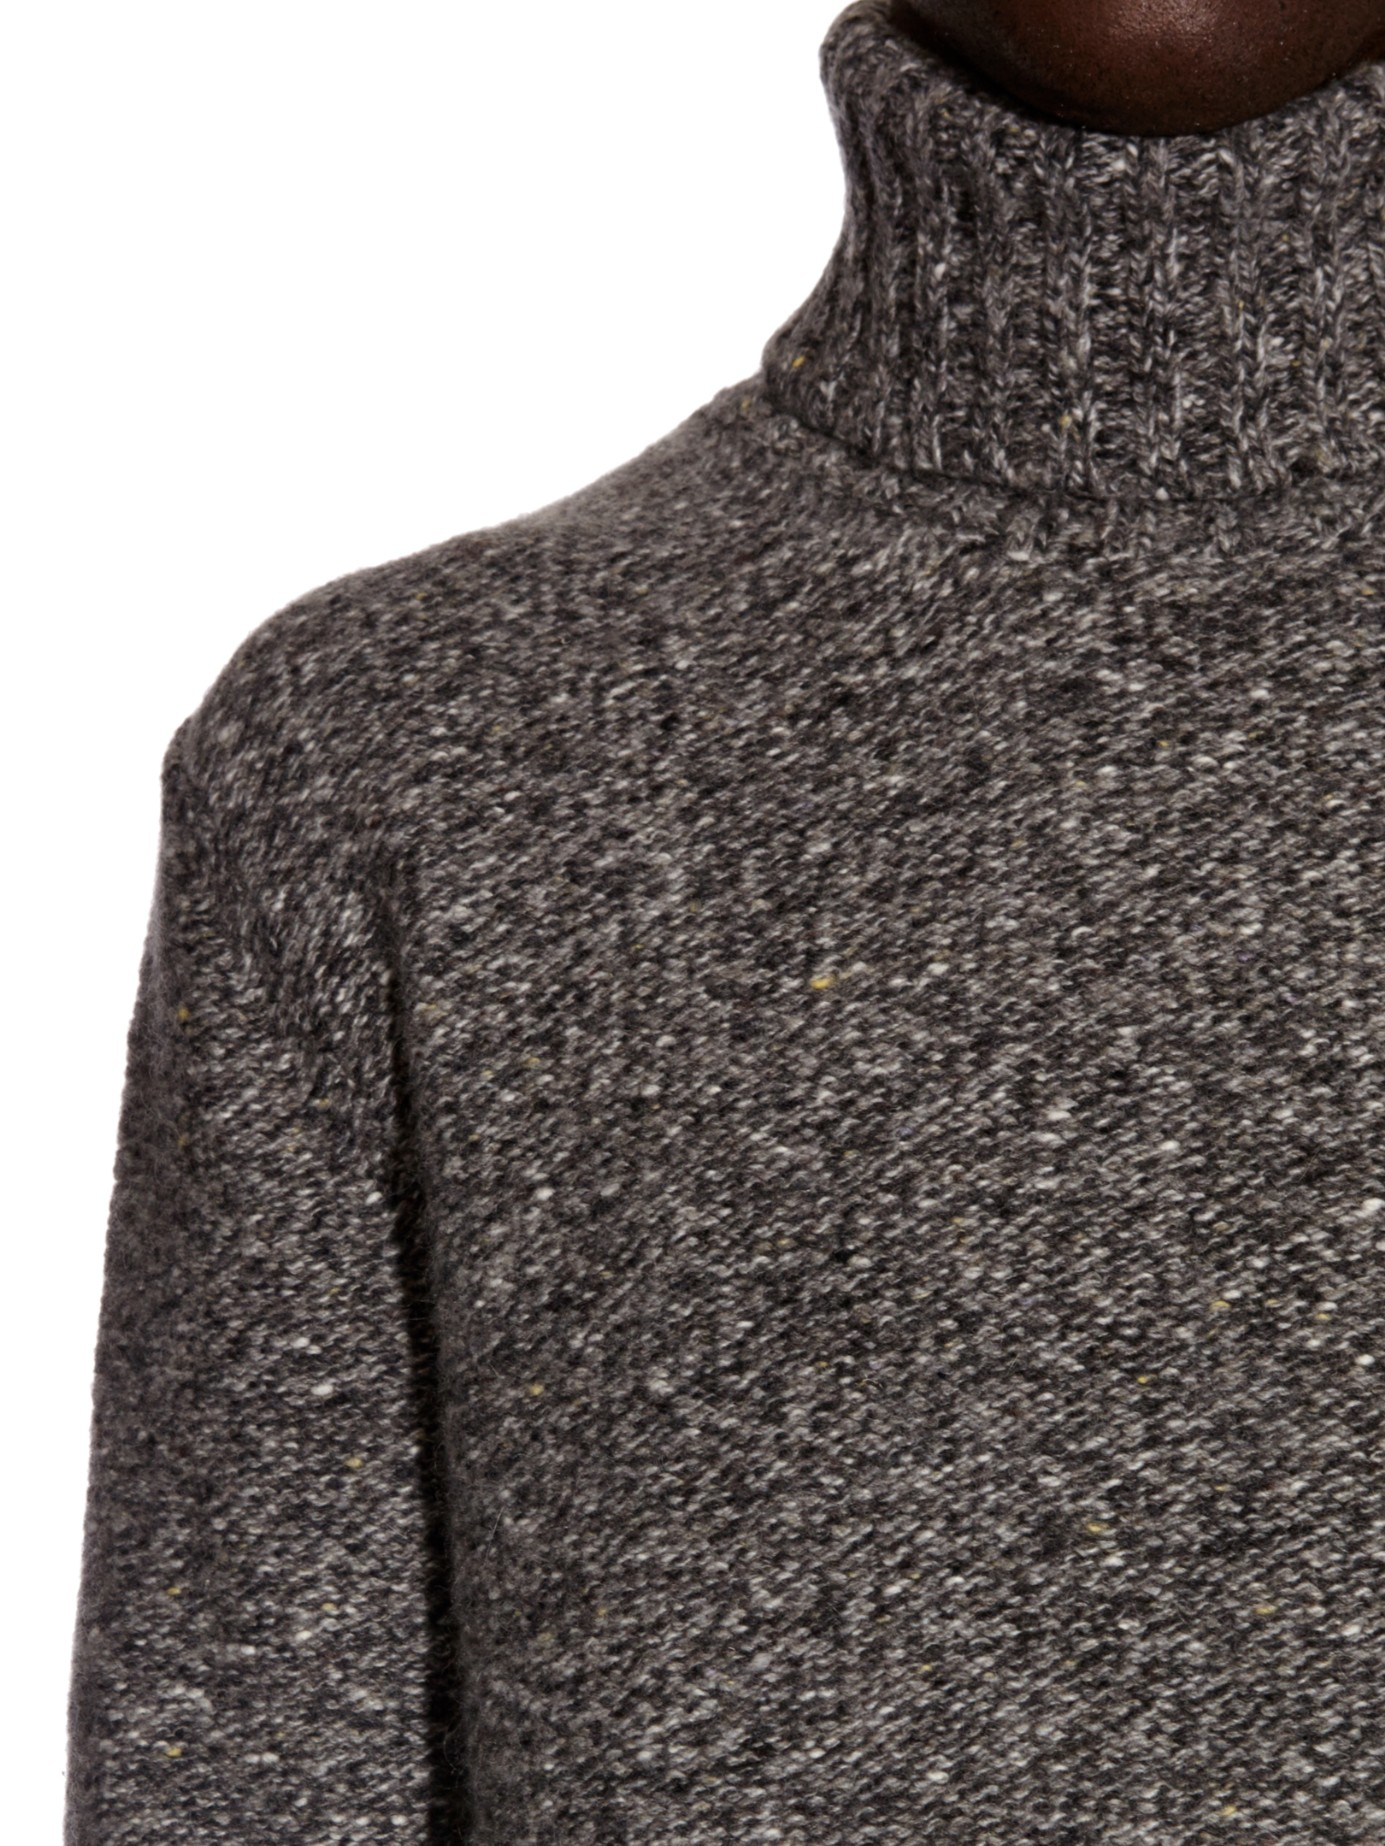 Lyst - Valentino Flecked Wool And Cashmere-blend Sweater in Gray for Men